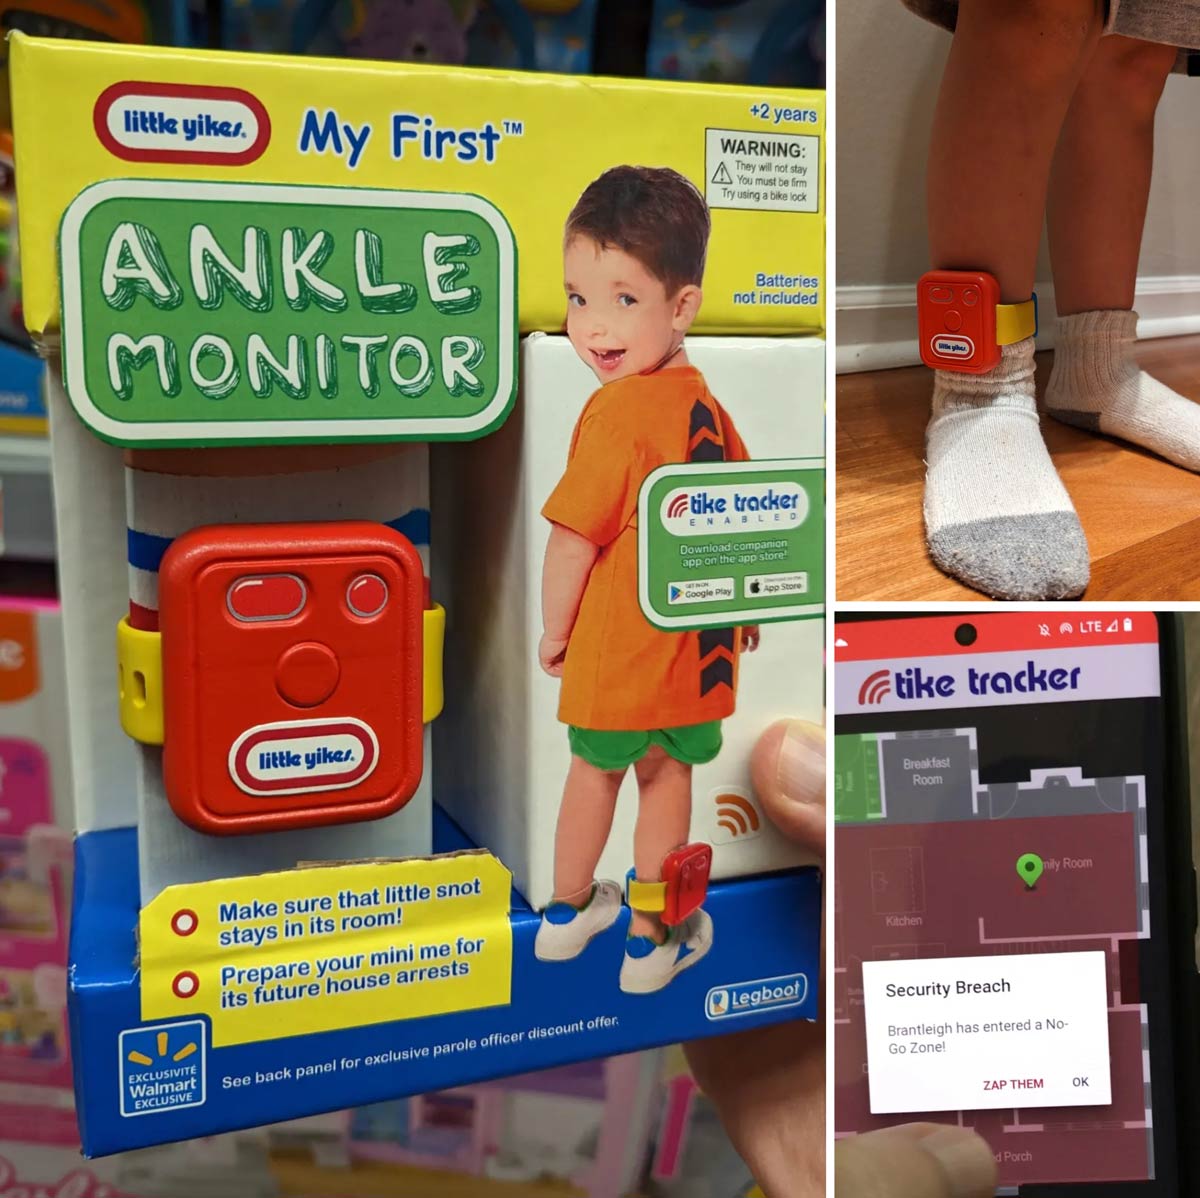 My first ankle monitor